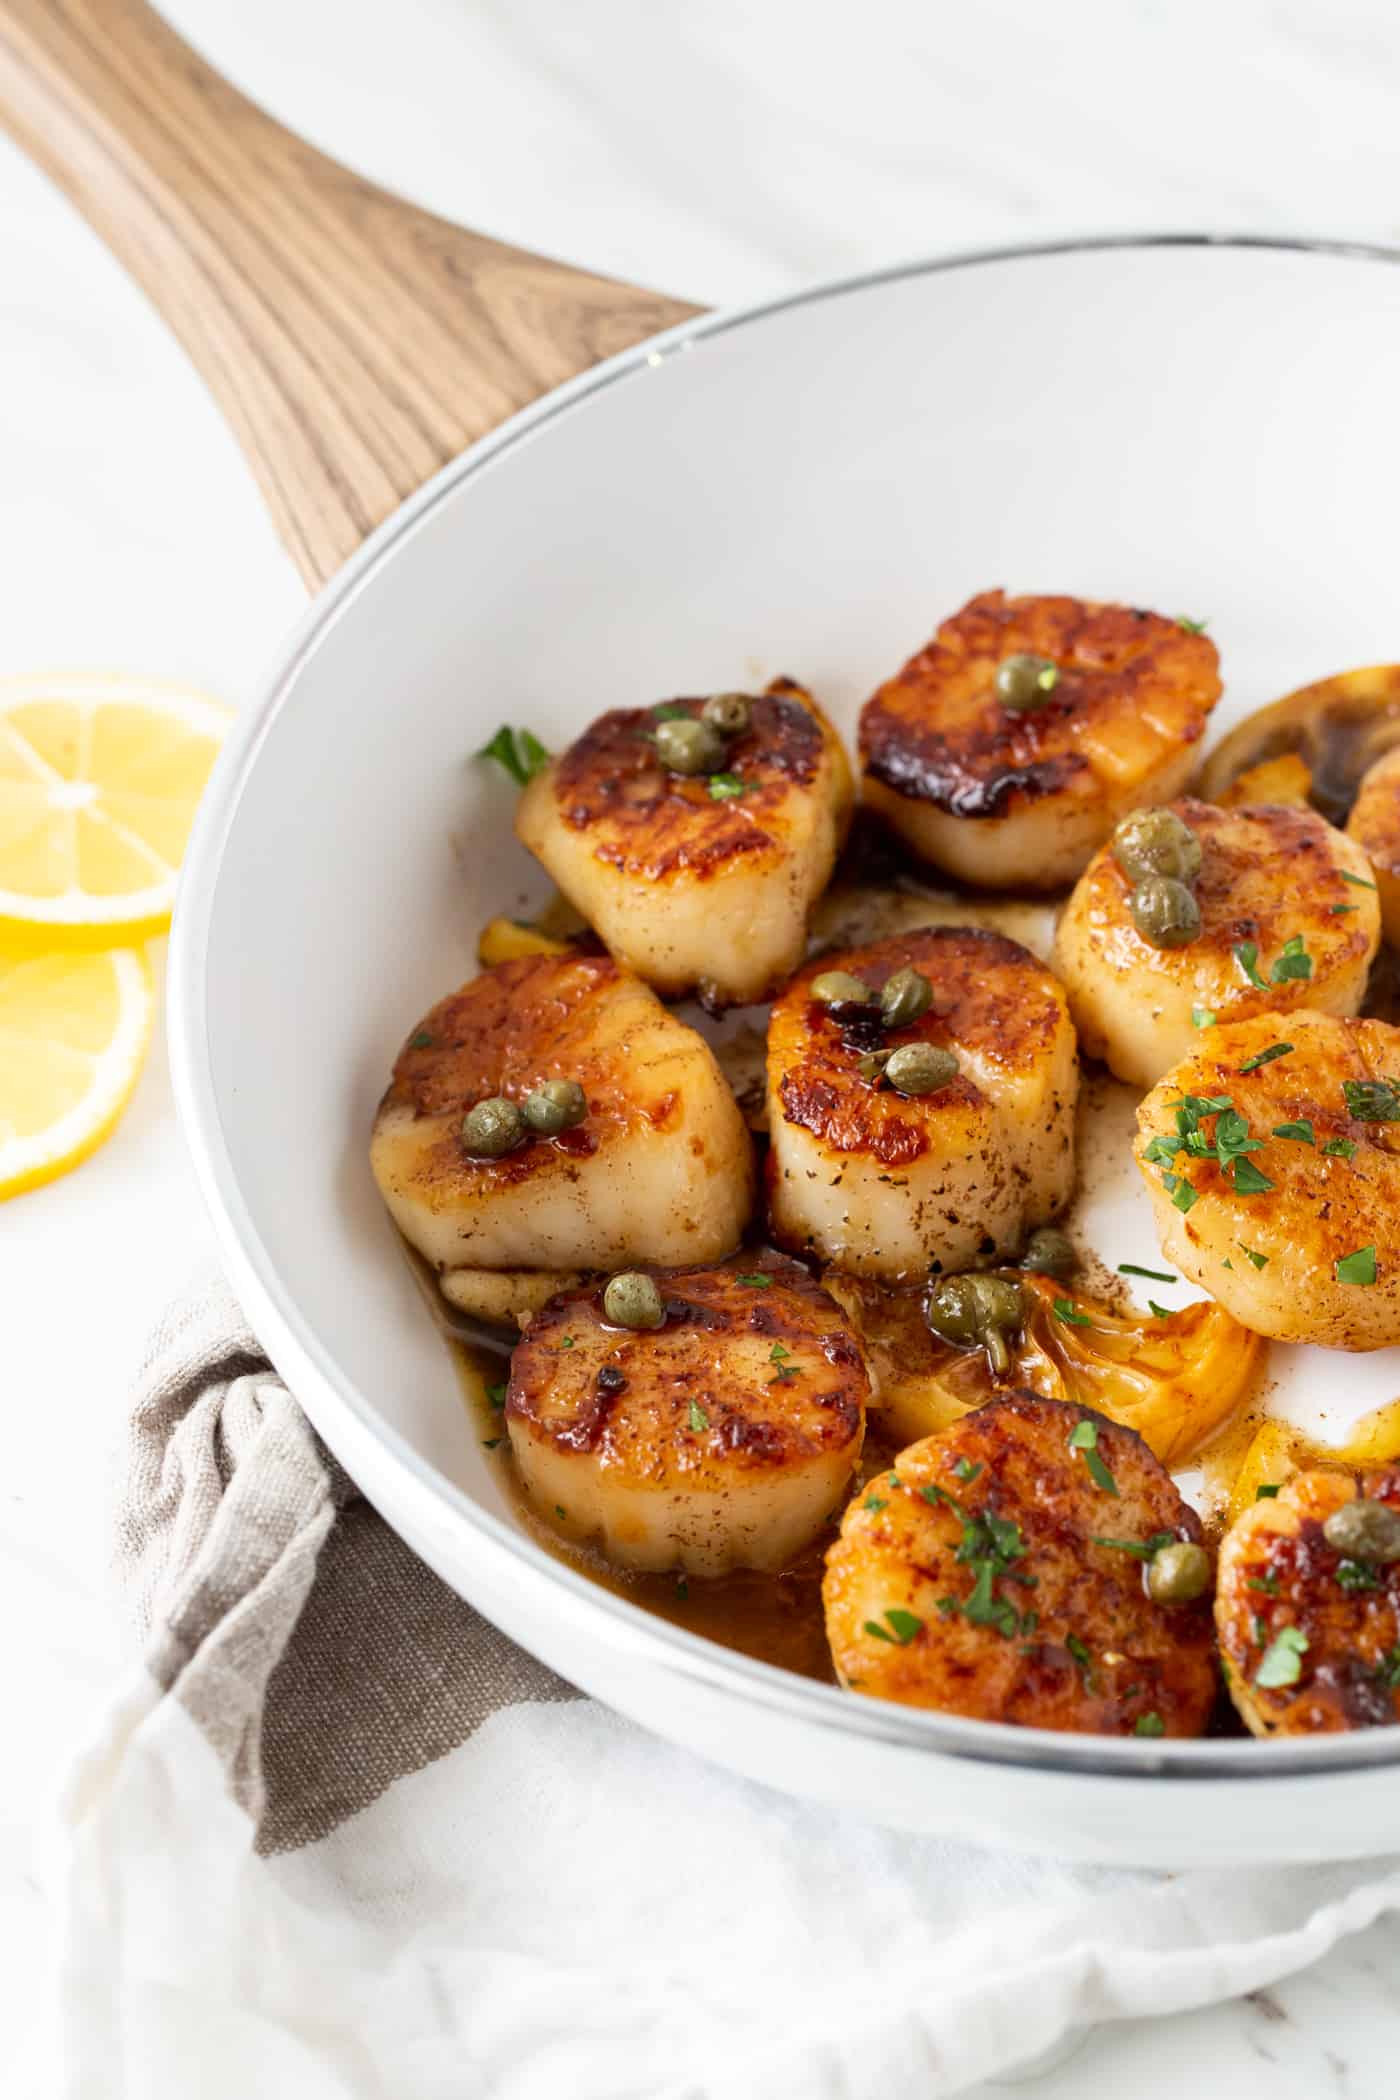 Scallops with Lemon, Capers and Brown Butter in a white bowl with fresh lemon slices for garnish.